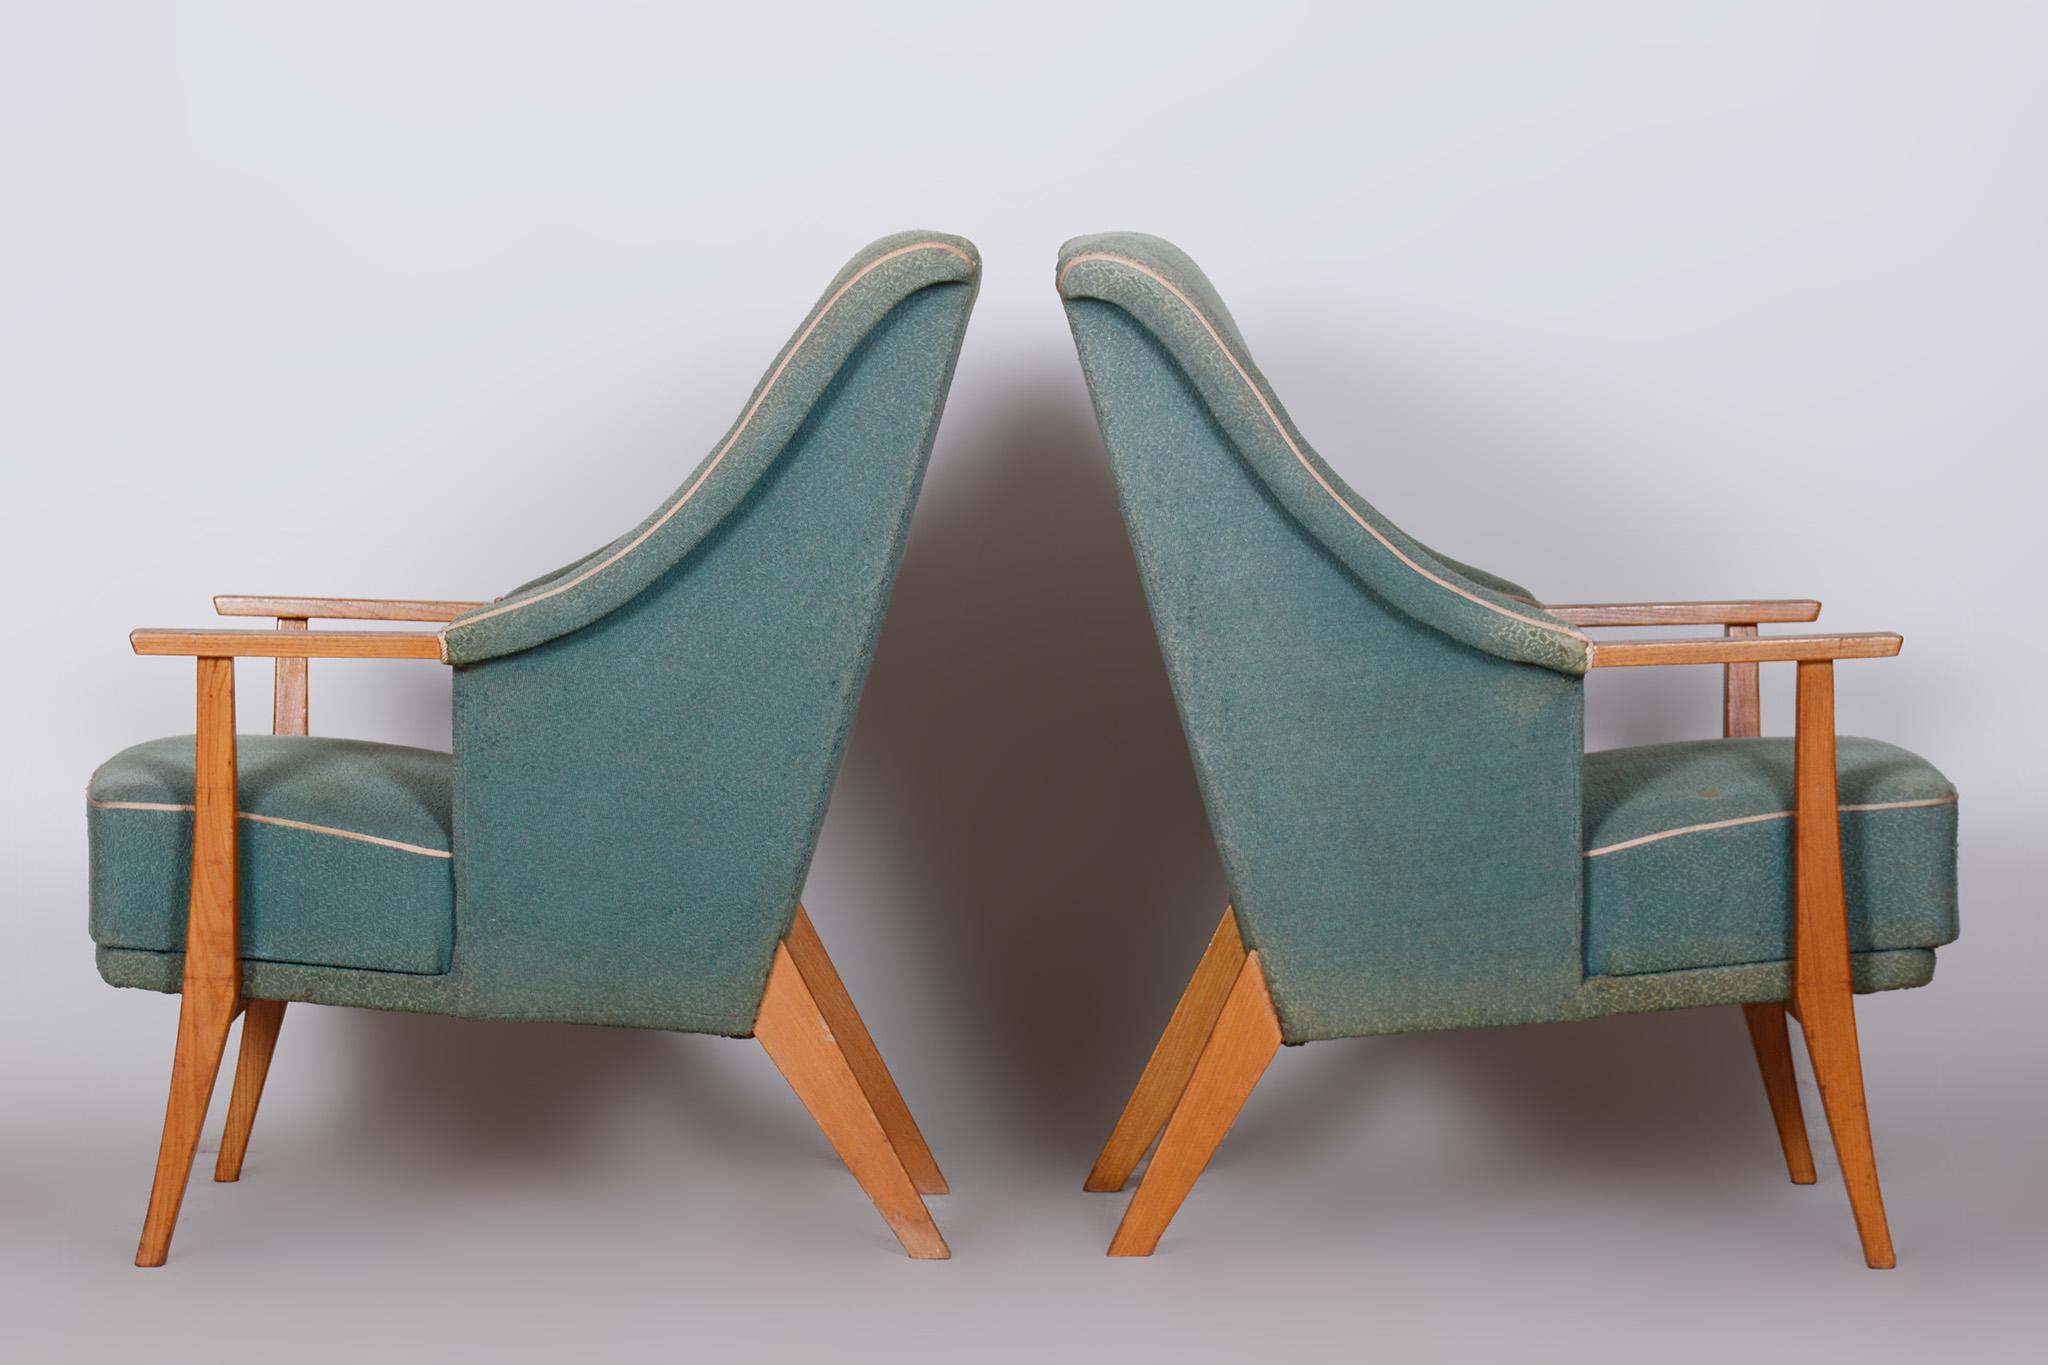 Pair of Unique Green Beech ArtDeco Armchairs Made in 1940s, Denmark For Sale 2